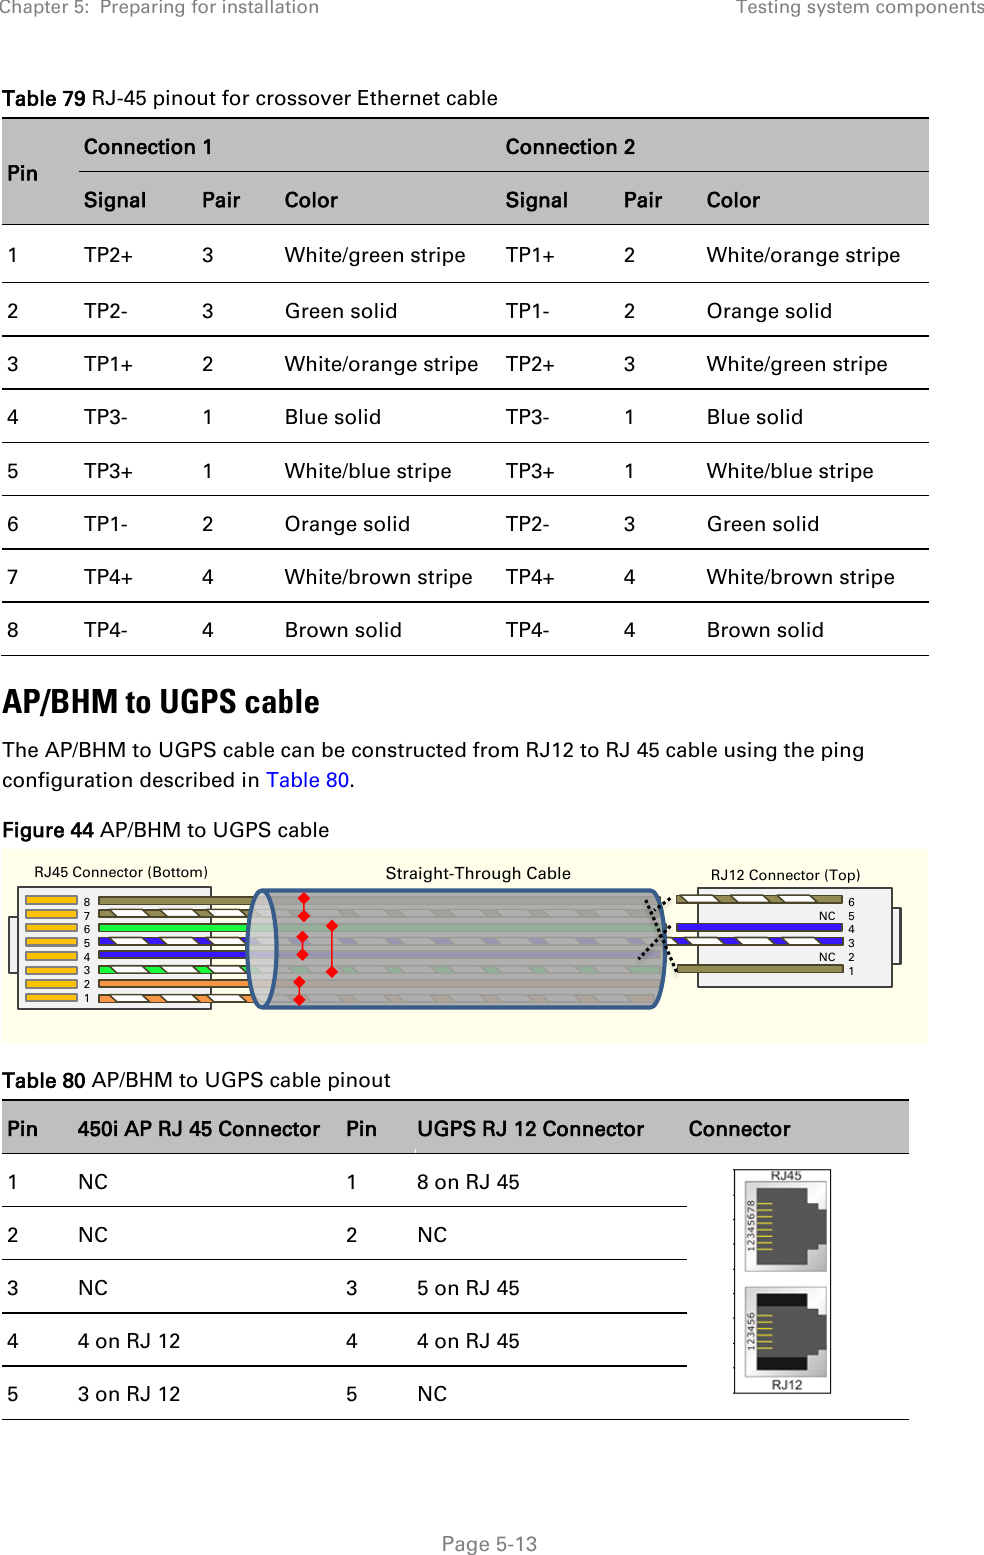 Chapter 5:  Preparing for installation Testing system components   Page 5-13 Table 79 RJ-45 pinout for crossover Ethernet cable Pin Connection 1 Connection 2 Signal Pair Color Signal Pair Color 1 TP2+ 3 White/green stripe TP1+ 2 White/orange stripe 2 TP2- 3 Green solid TP1- 2 Orange solid 3 TP1+ 2 White/orange stripe TP2+ 3 White/green stripe 4 TP3- 1 Blue solid TP3- 1 Blue solid 5 TP3+ 1 White/blue stripe TP3+ 1 White/blue stripe 6 TP1- 2 Orange solid TP2- 3 Green solid 7 TP4+ 4 White/brown stripe TP4+ 4 White/brown stripe 8 TP4- 4 Brown solid TP4- 4 Brown solid AP/BHM to UGPS cable The AP/BHM to UGPS cable can be constructed from RJ12 to RJ 45 cable using the ping configuration described in Table 80. Figure 44 AP/BHM to UGPS cable   Table 80 AP/BHM to UGPS cable pinout Pin 450i AP RJ 45 Connector Pin UGPS RJ 12 Connector Connector 1 NC 1 8 on RJ 45  2 NC 2 NC 3 NC 3 5 on RJ 45 4 4 on RJ 12 4 4 on RJ 45 5 3 on RJ 12 5 NC `` RJ45 Connector (Bottom) Straight-Through Cable  RJ12 Connector (Top) 6 NC    5 4 3 NC    2 1 8     7 6 5 4 3 2 1  